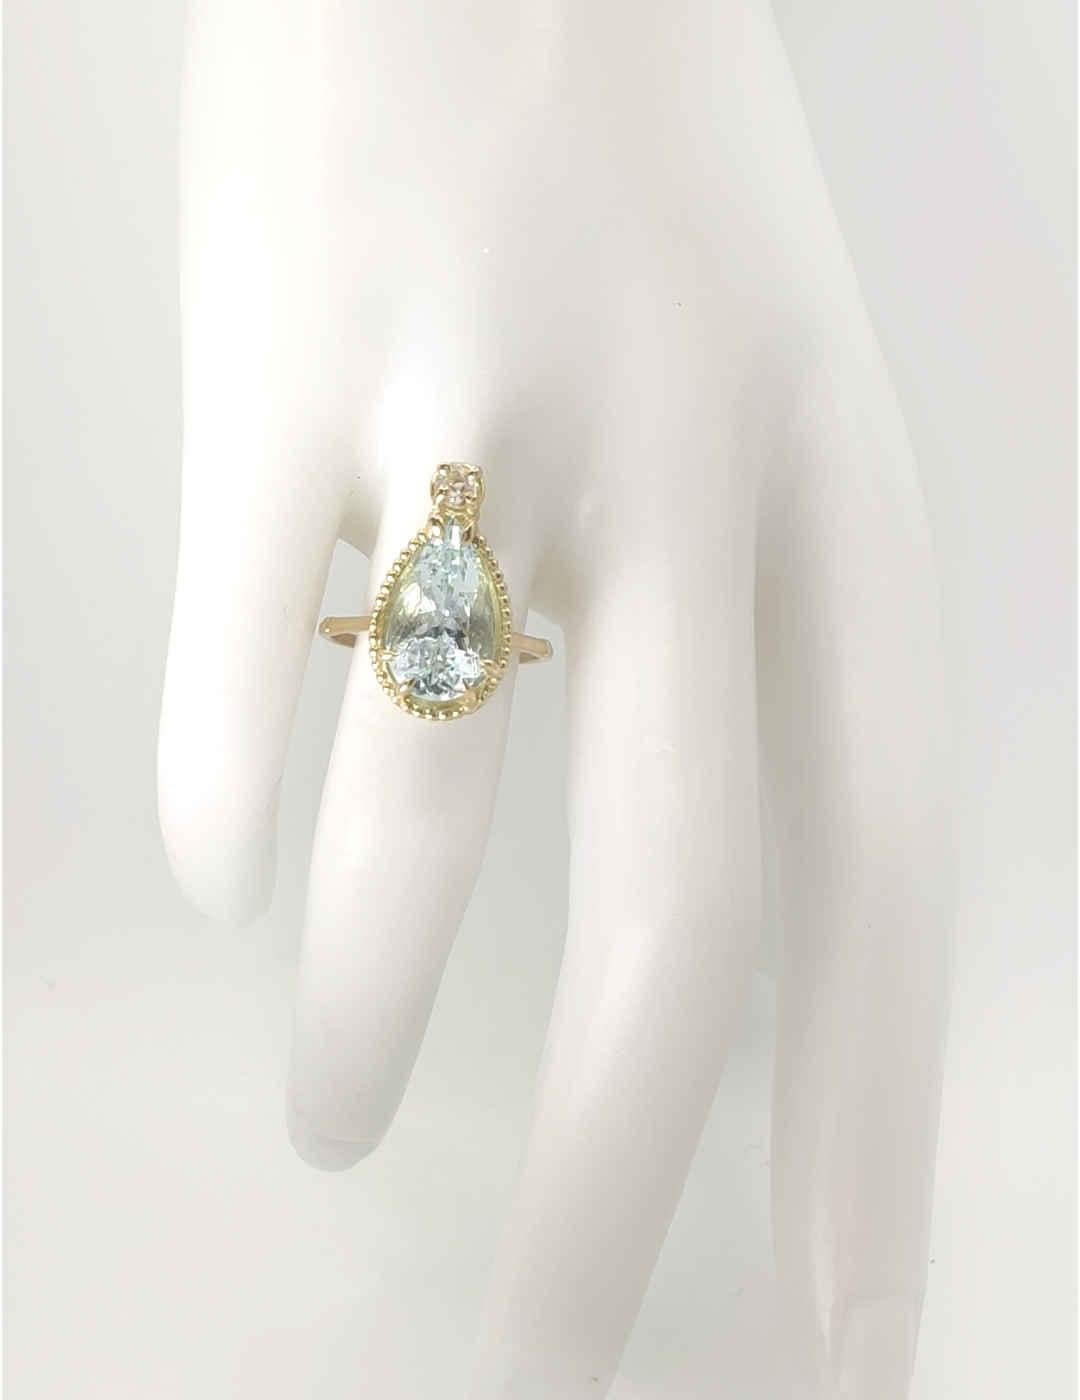 Discover our unique 18K Gold Ring, perfect for weddings and proposals. Handcrafted with a stunning pear-cut aquamarine and a natural diamond, this piece adds brilliance and elegance to any occasion. Certified by the Spanish Gemological Institute,